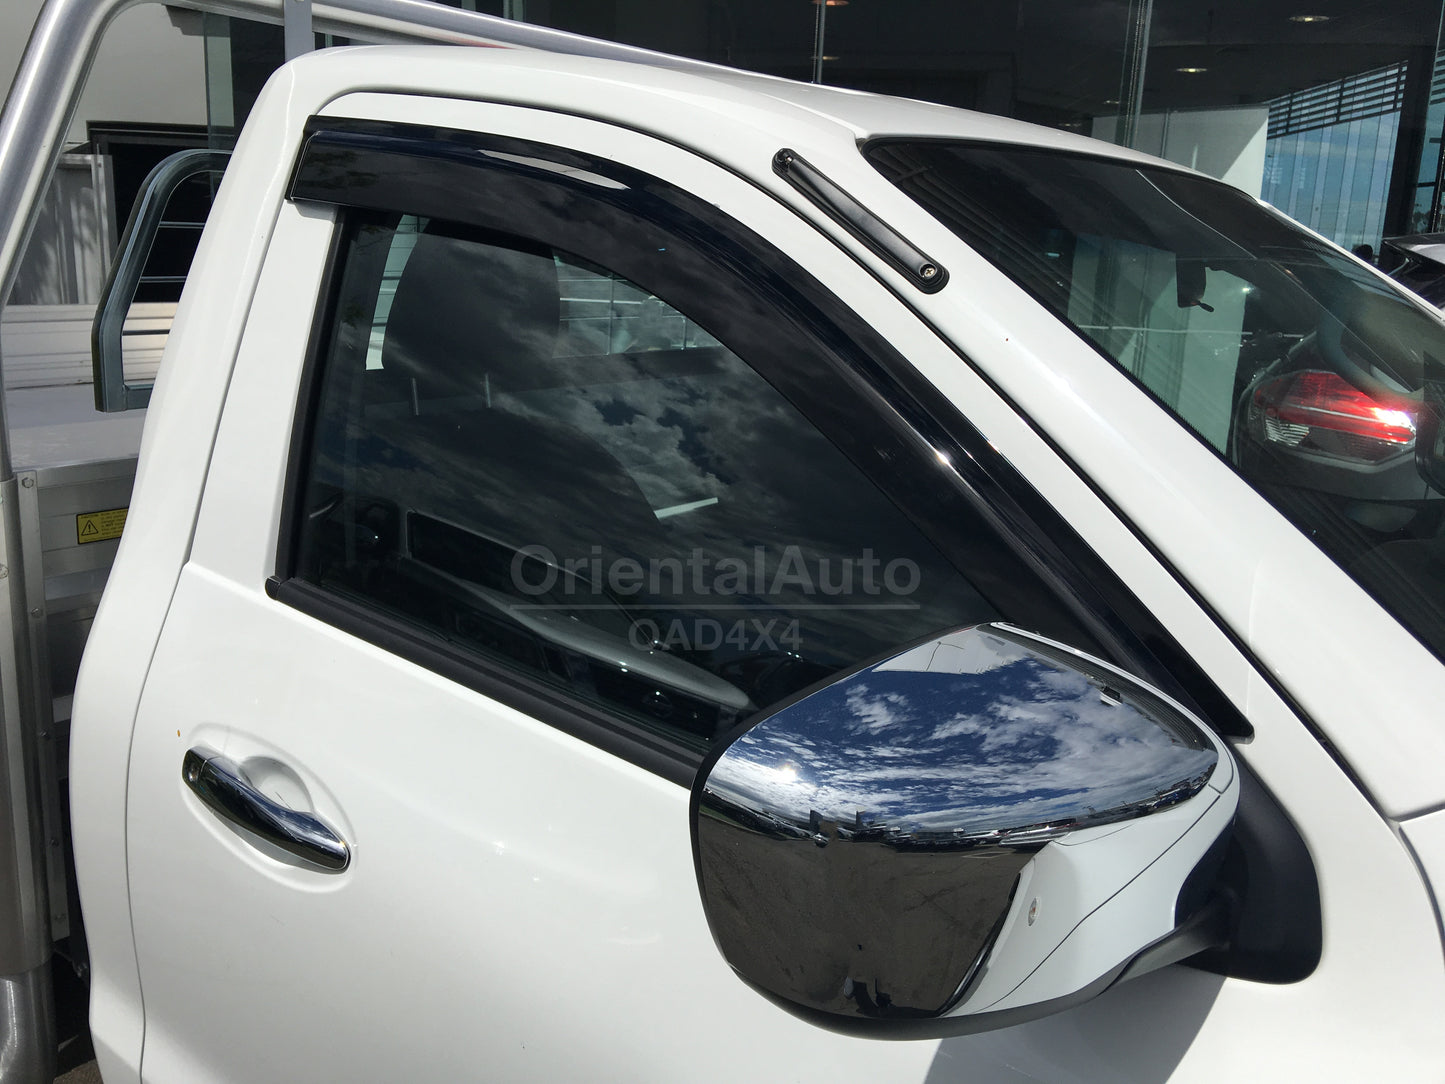 Injection Modeling Bonnet Protector & Injection Weathershield Weather Shields Window Visor for Nissan NP300 D23 Single / Extra Cab 2015-2020